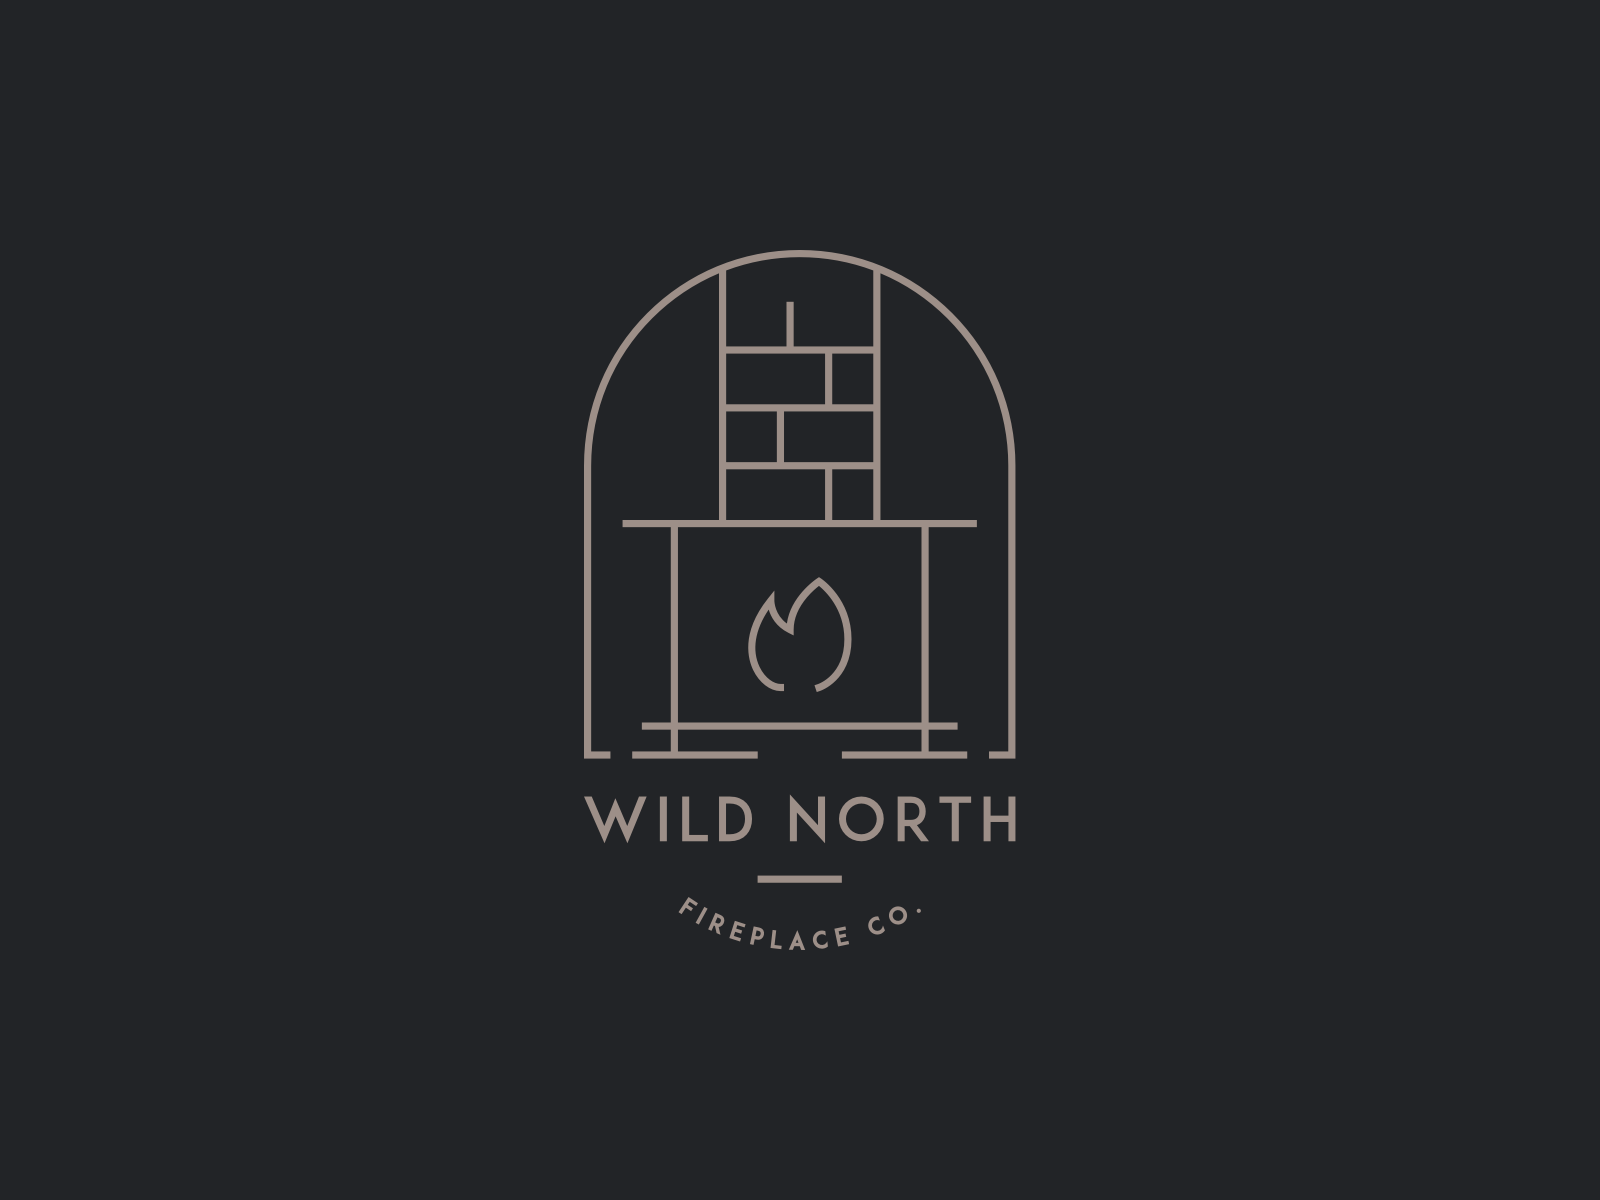 Wild North Fireplace Co. by Brit Pinesich on Dribbble